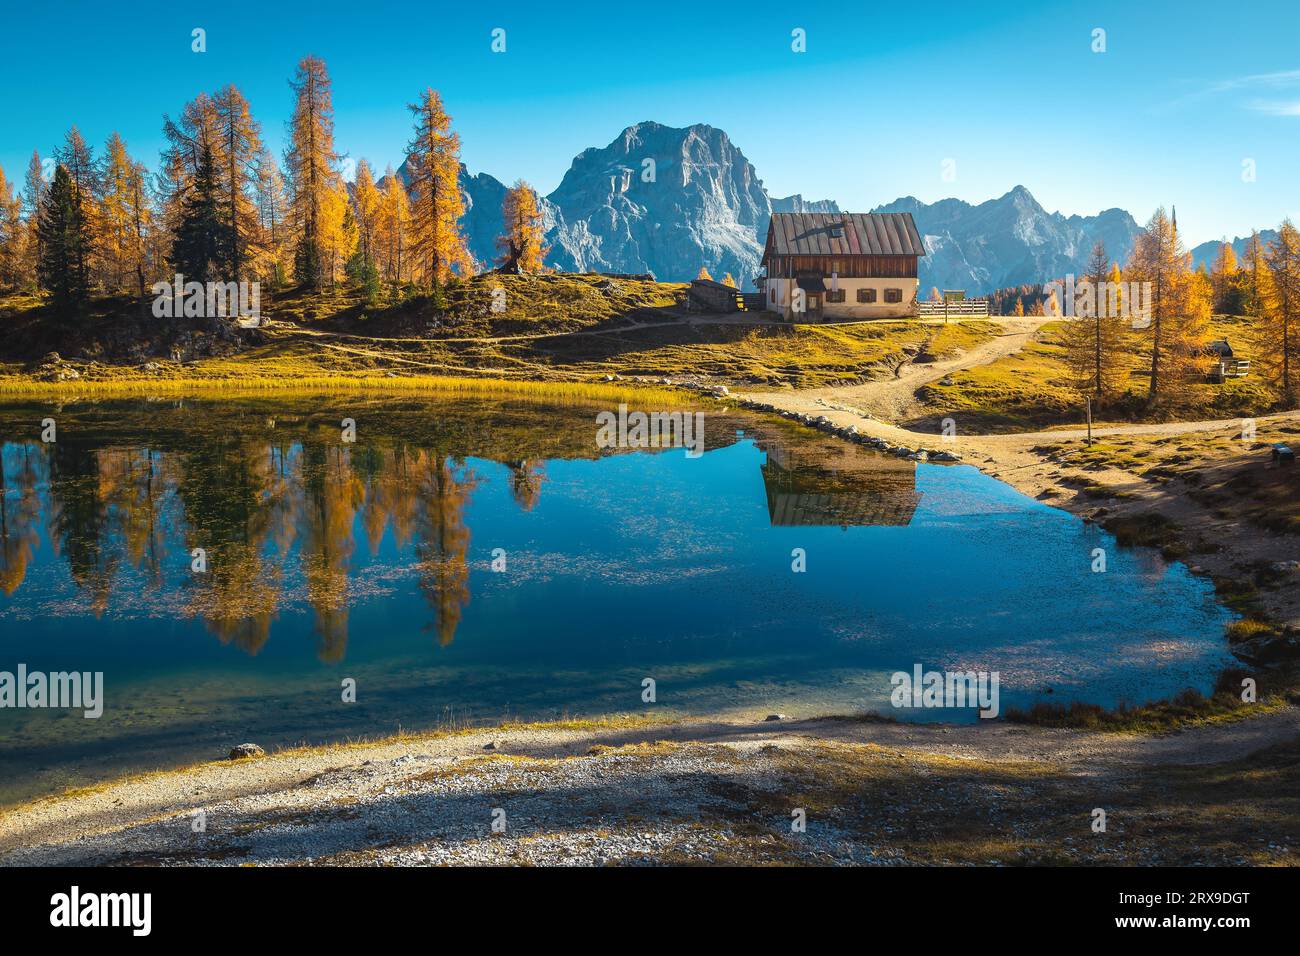 One of the most picturesque and famous small alpine lake in the Dolomites at autumn, lake Federa, Italy, Europe Stock Photo